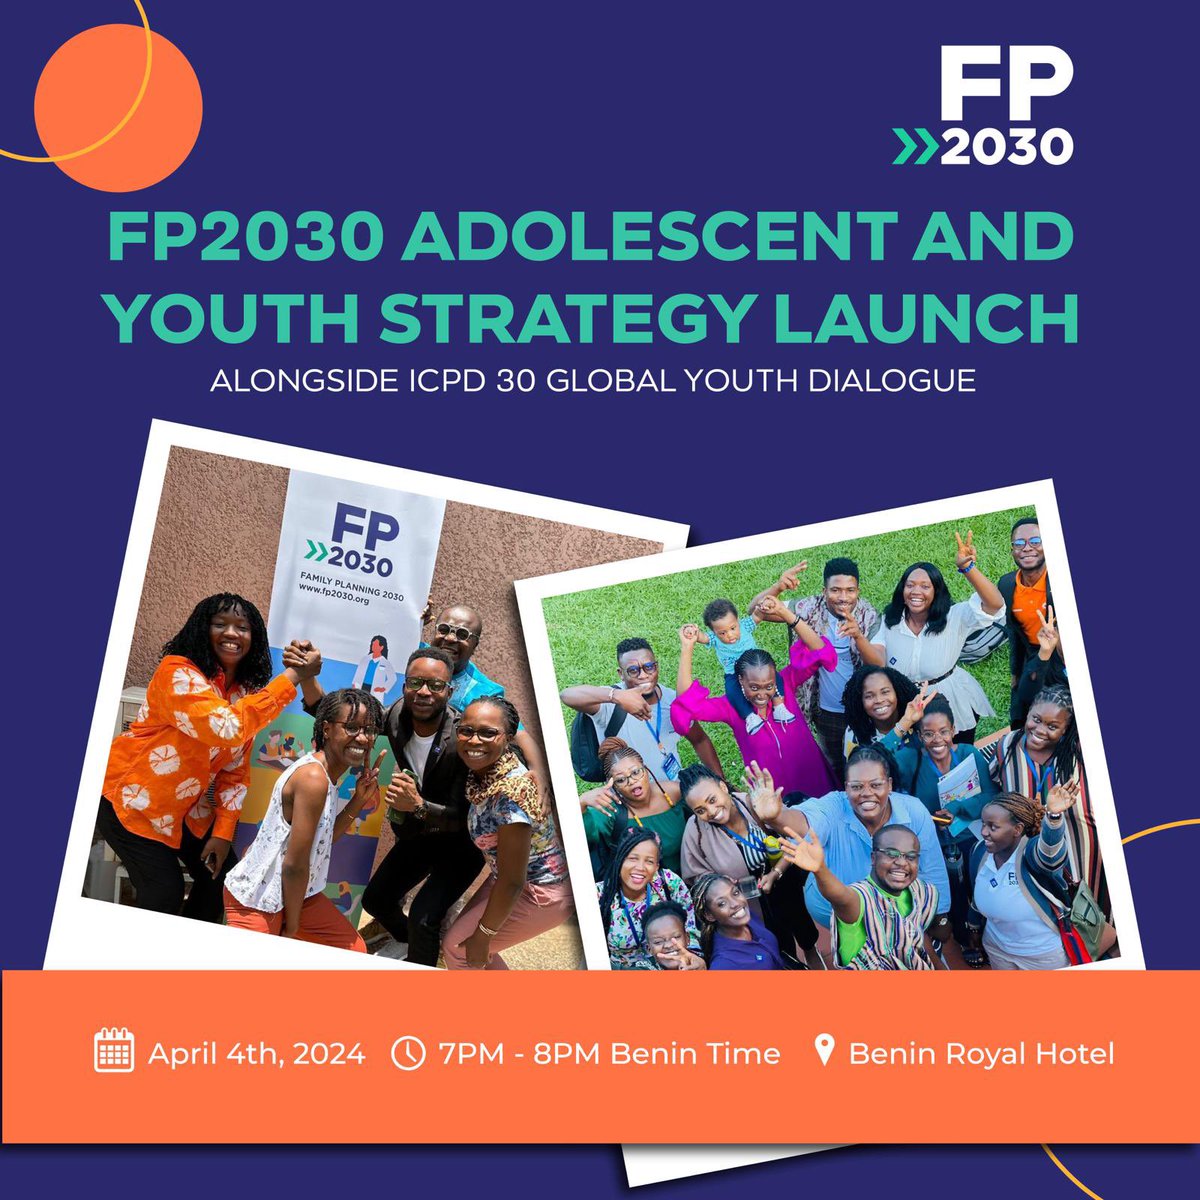 We are live on Facebook! Join us to stream the @FP2030Global AY strategy launch happening now by 7pm WAT at Benin Royal Hotel, Cotonou Click link 🔗: facebook.com/61551492173863…